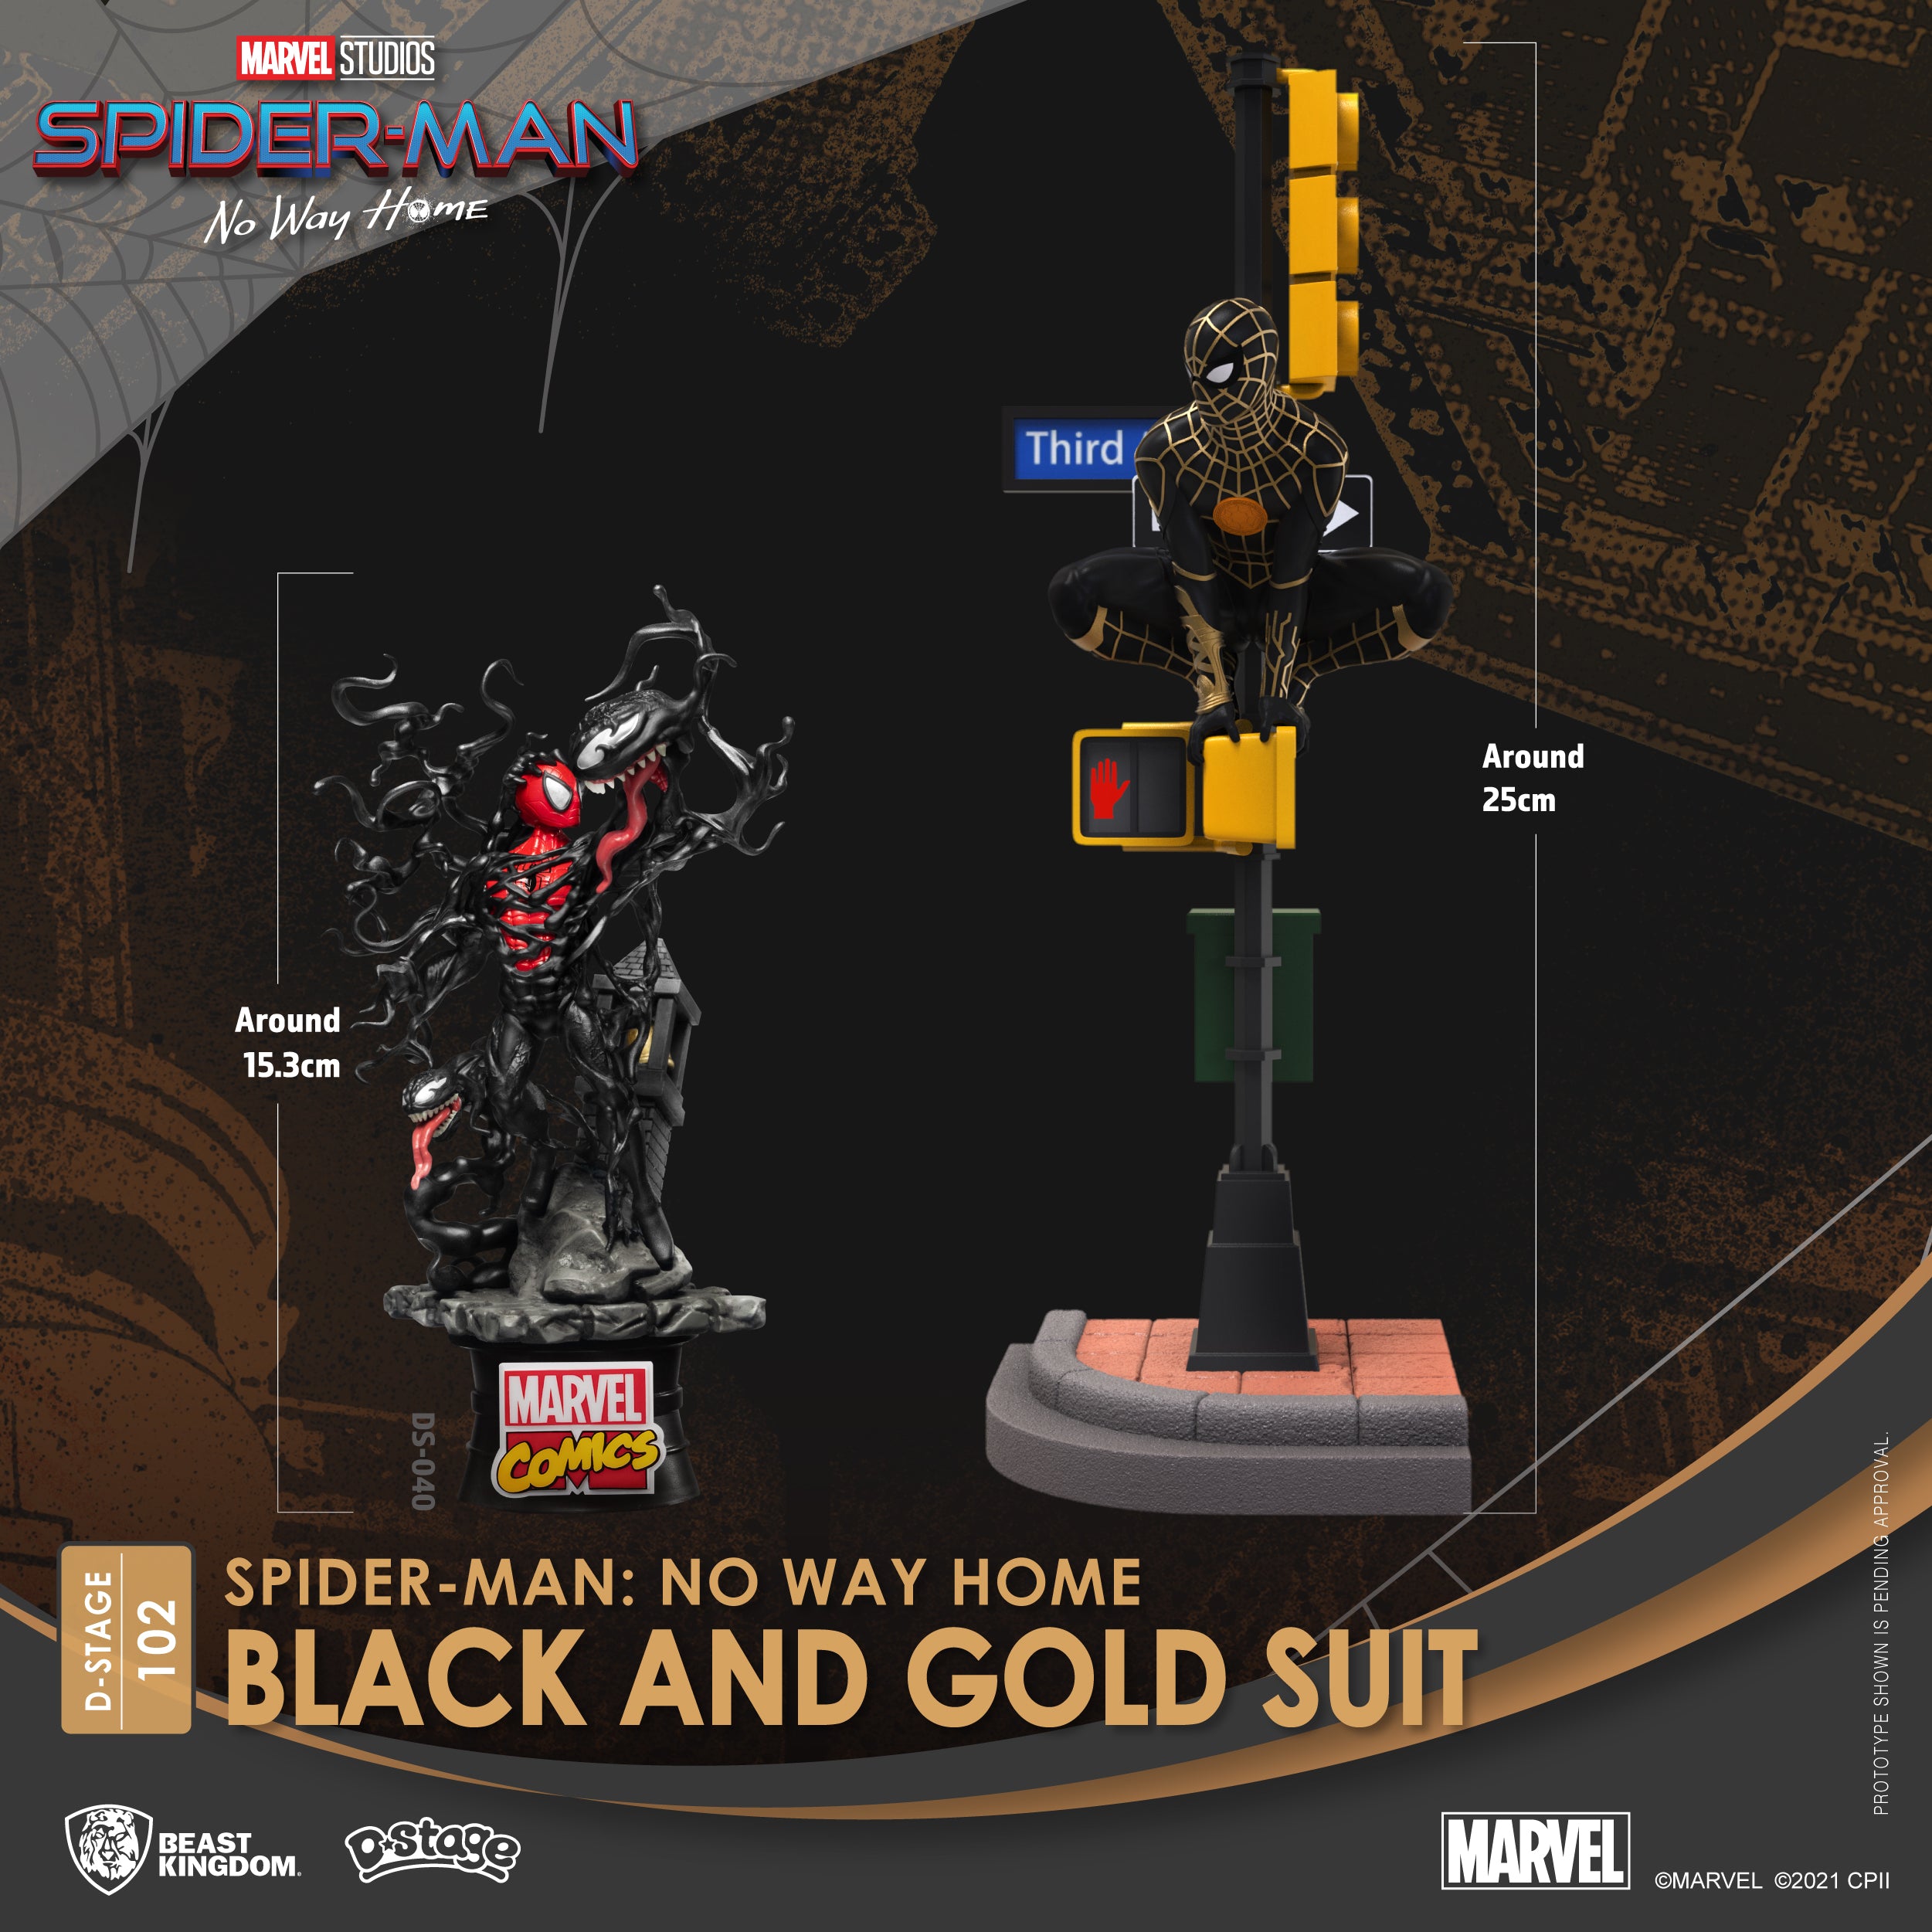 Beast Kingdom DS-102 Marvel Spider-Man: No Way Home Black and Gold Suit Diorama Stage D-Stage Figure Statue